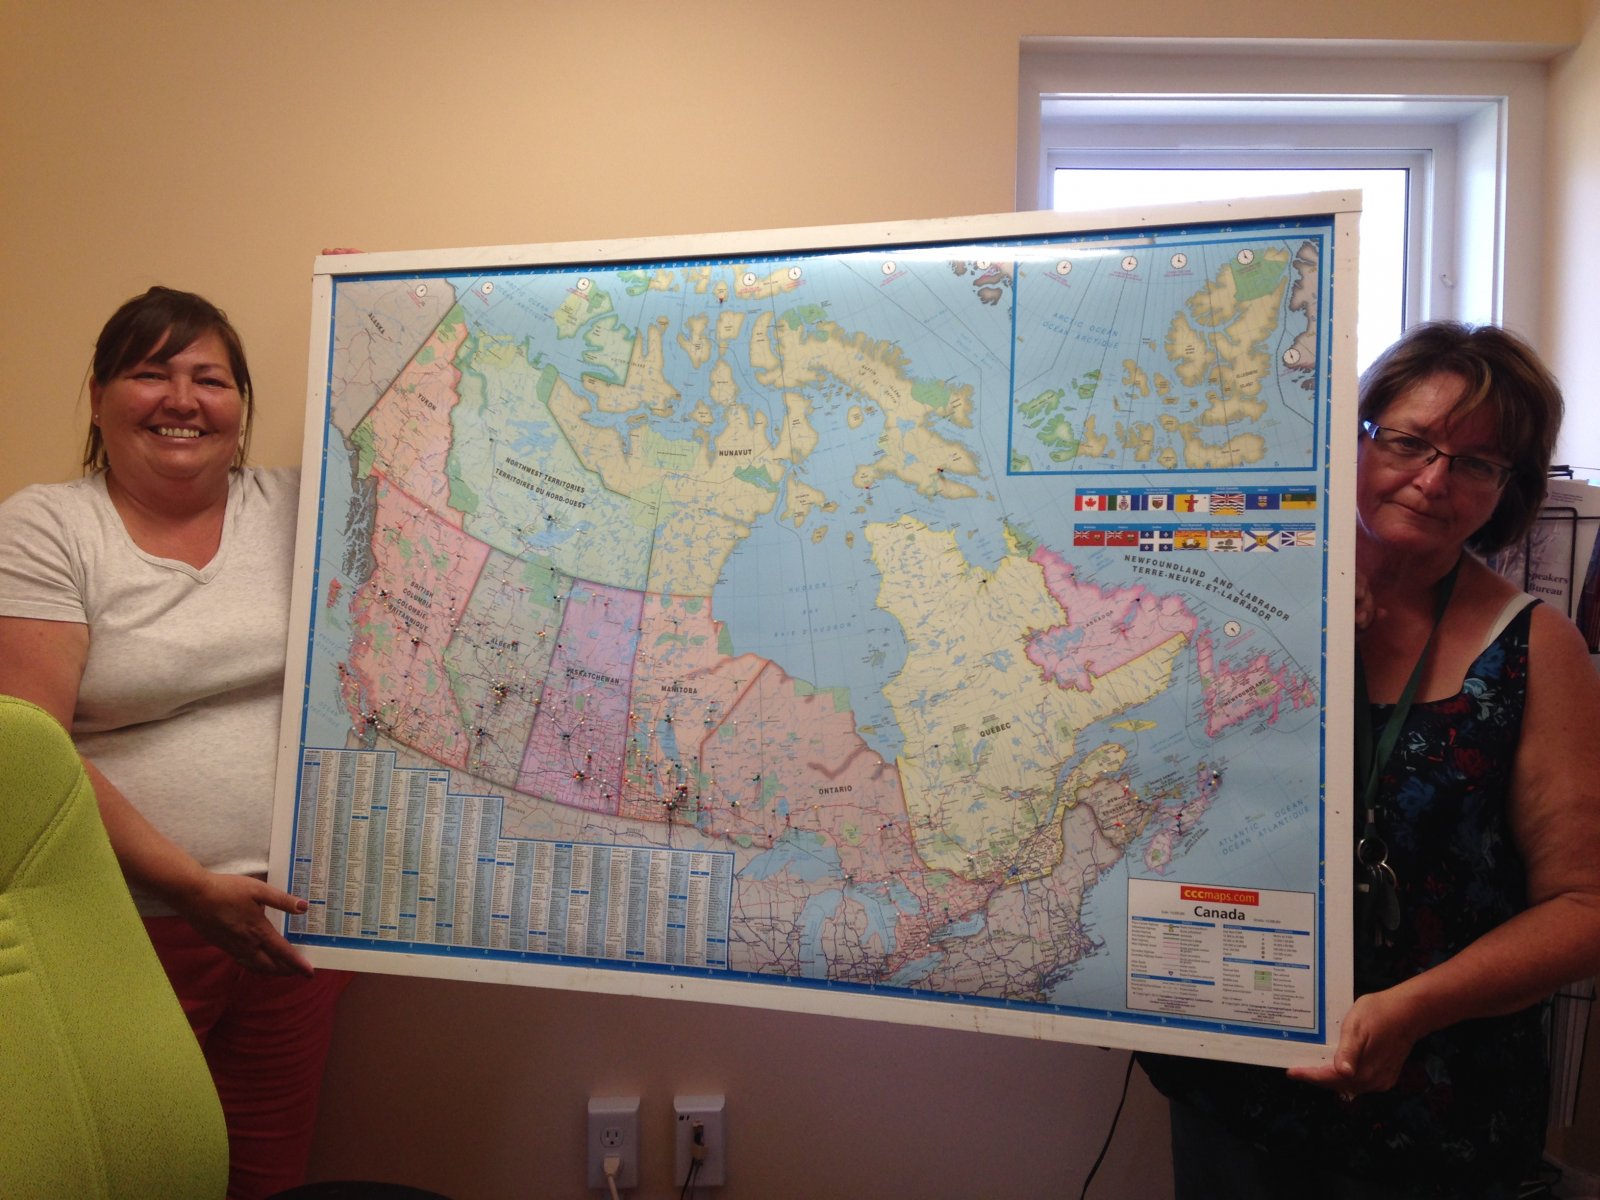 GIGNOO Shelter workers, Peggy and Sheila show the Shelter Map